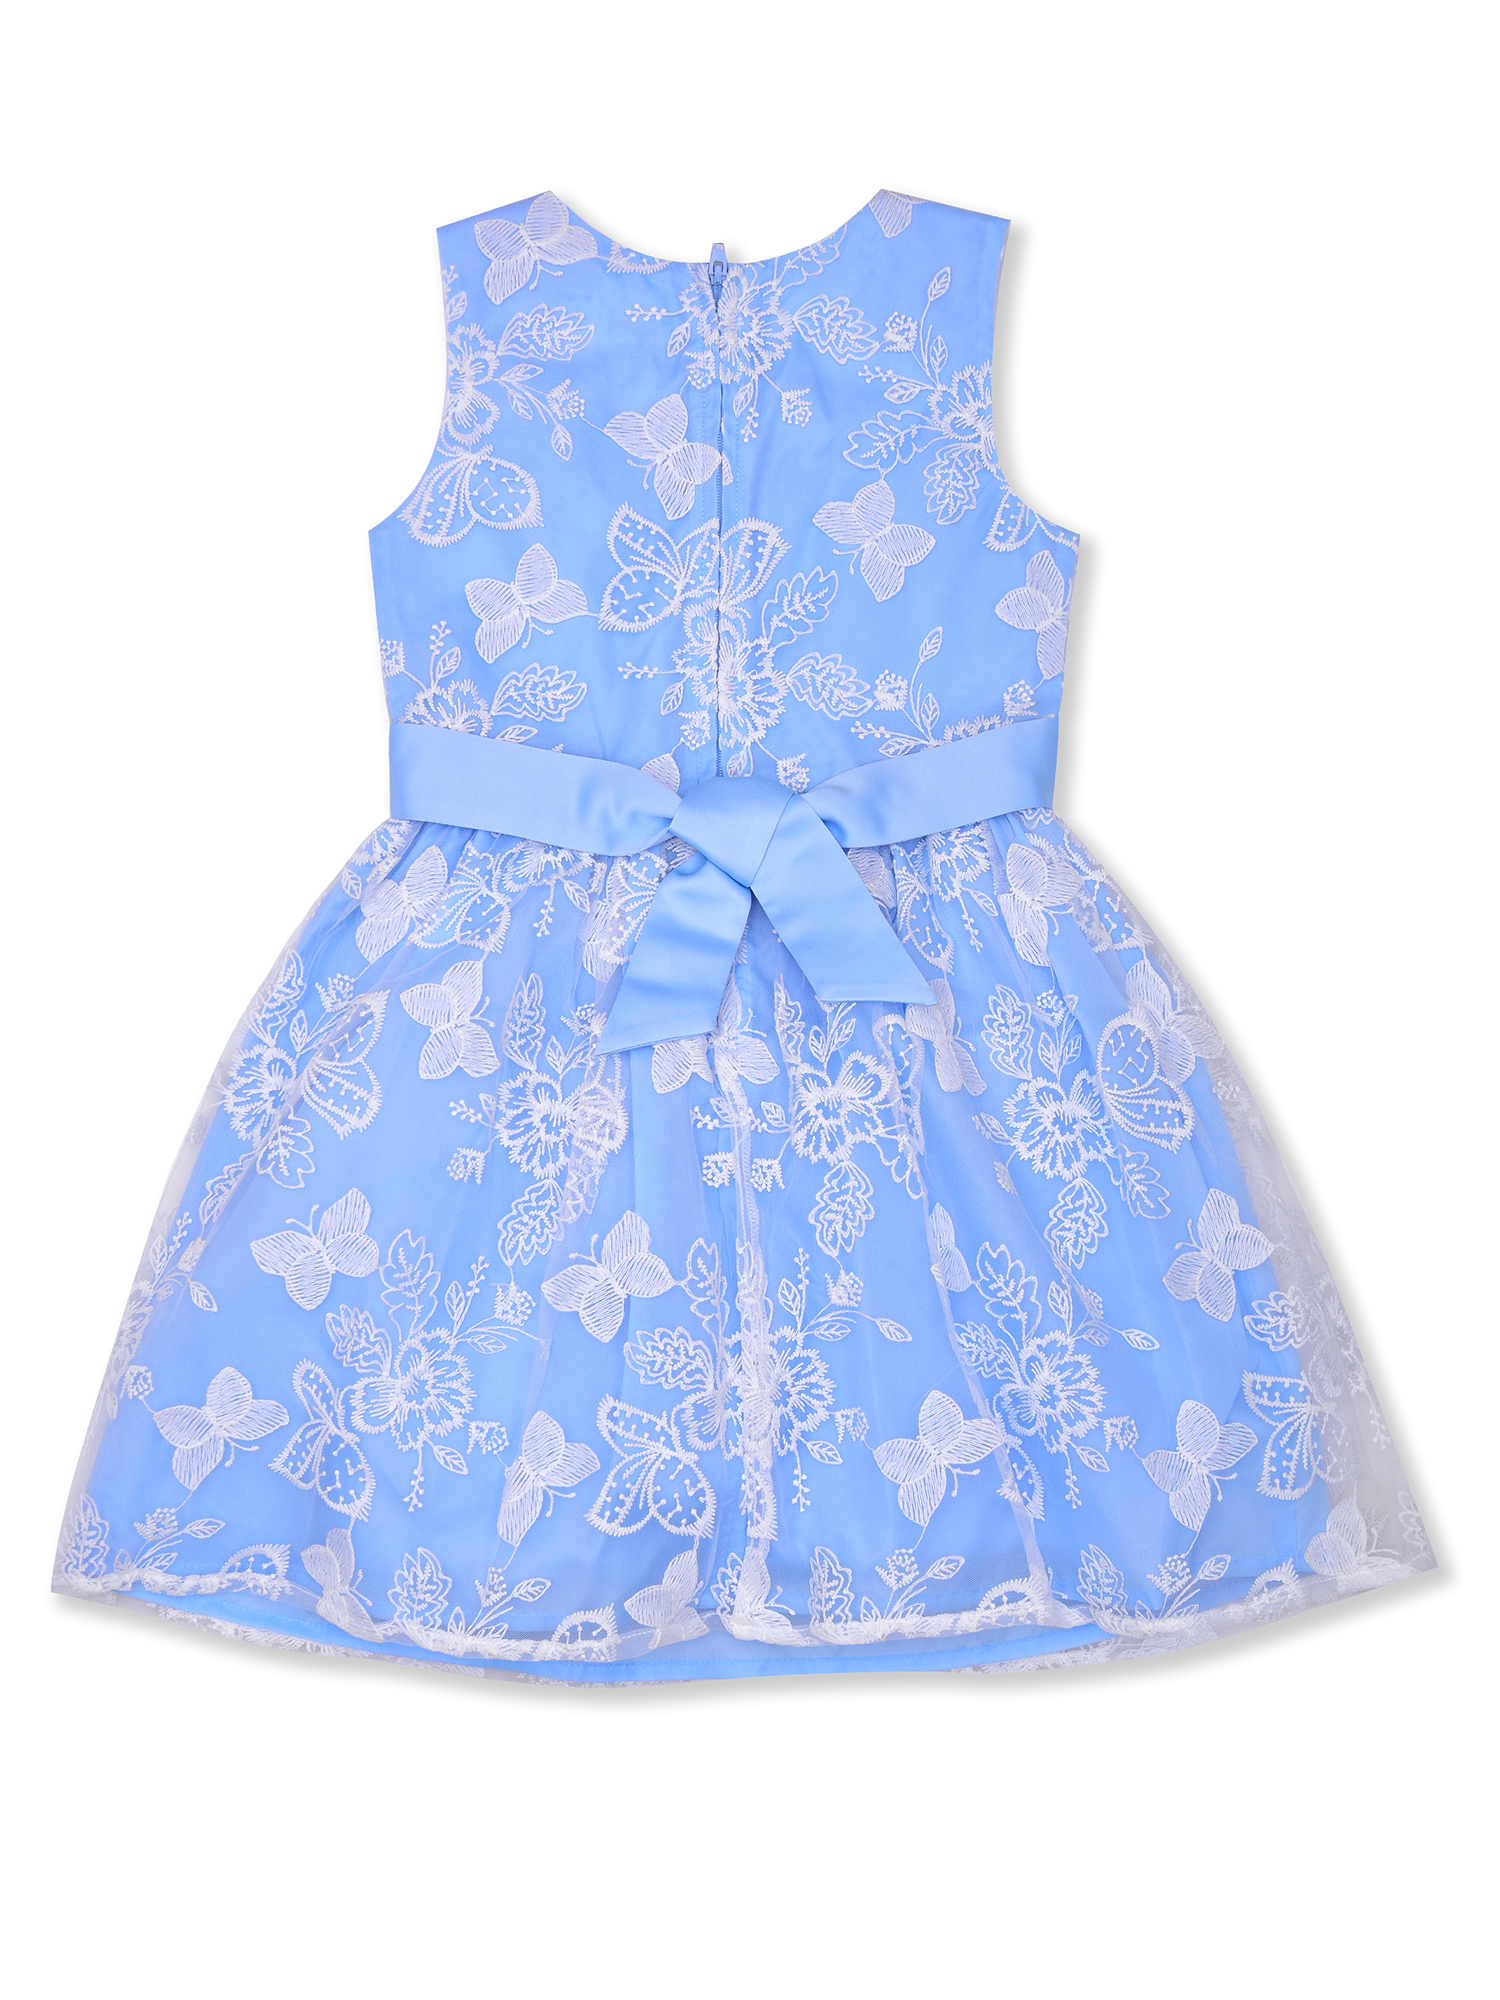 Wonder Nation Girls Butterfly Embriodery Sleeveless Dress, Sizes 4-18 & Plus - image 2 of 3